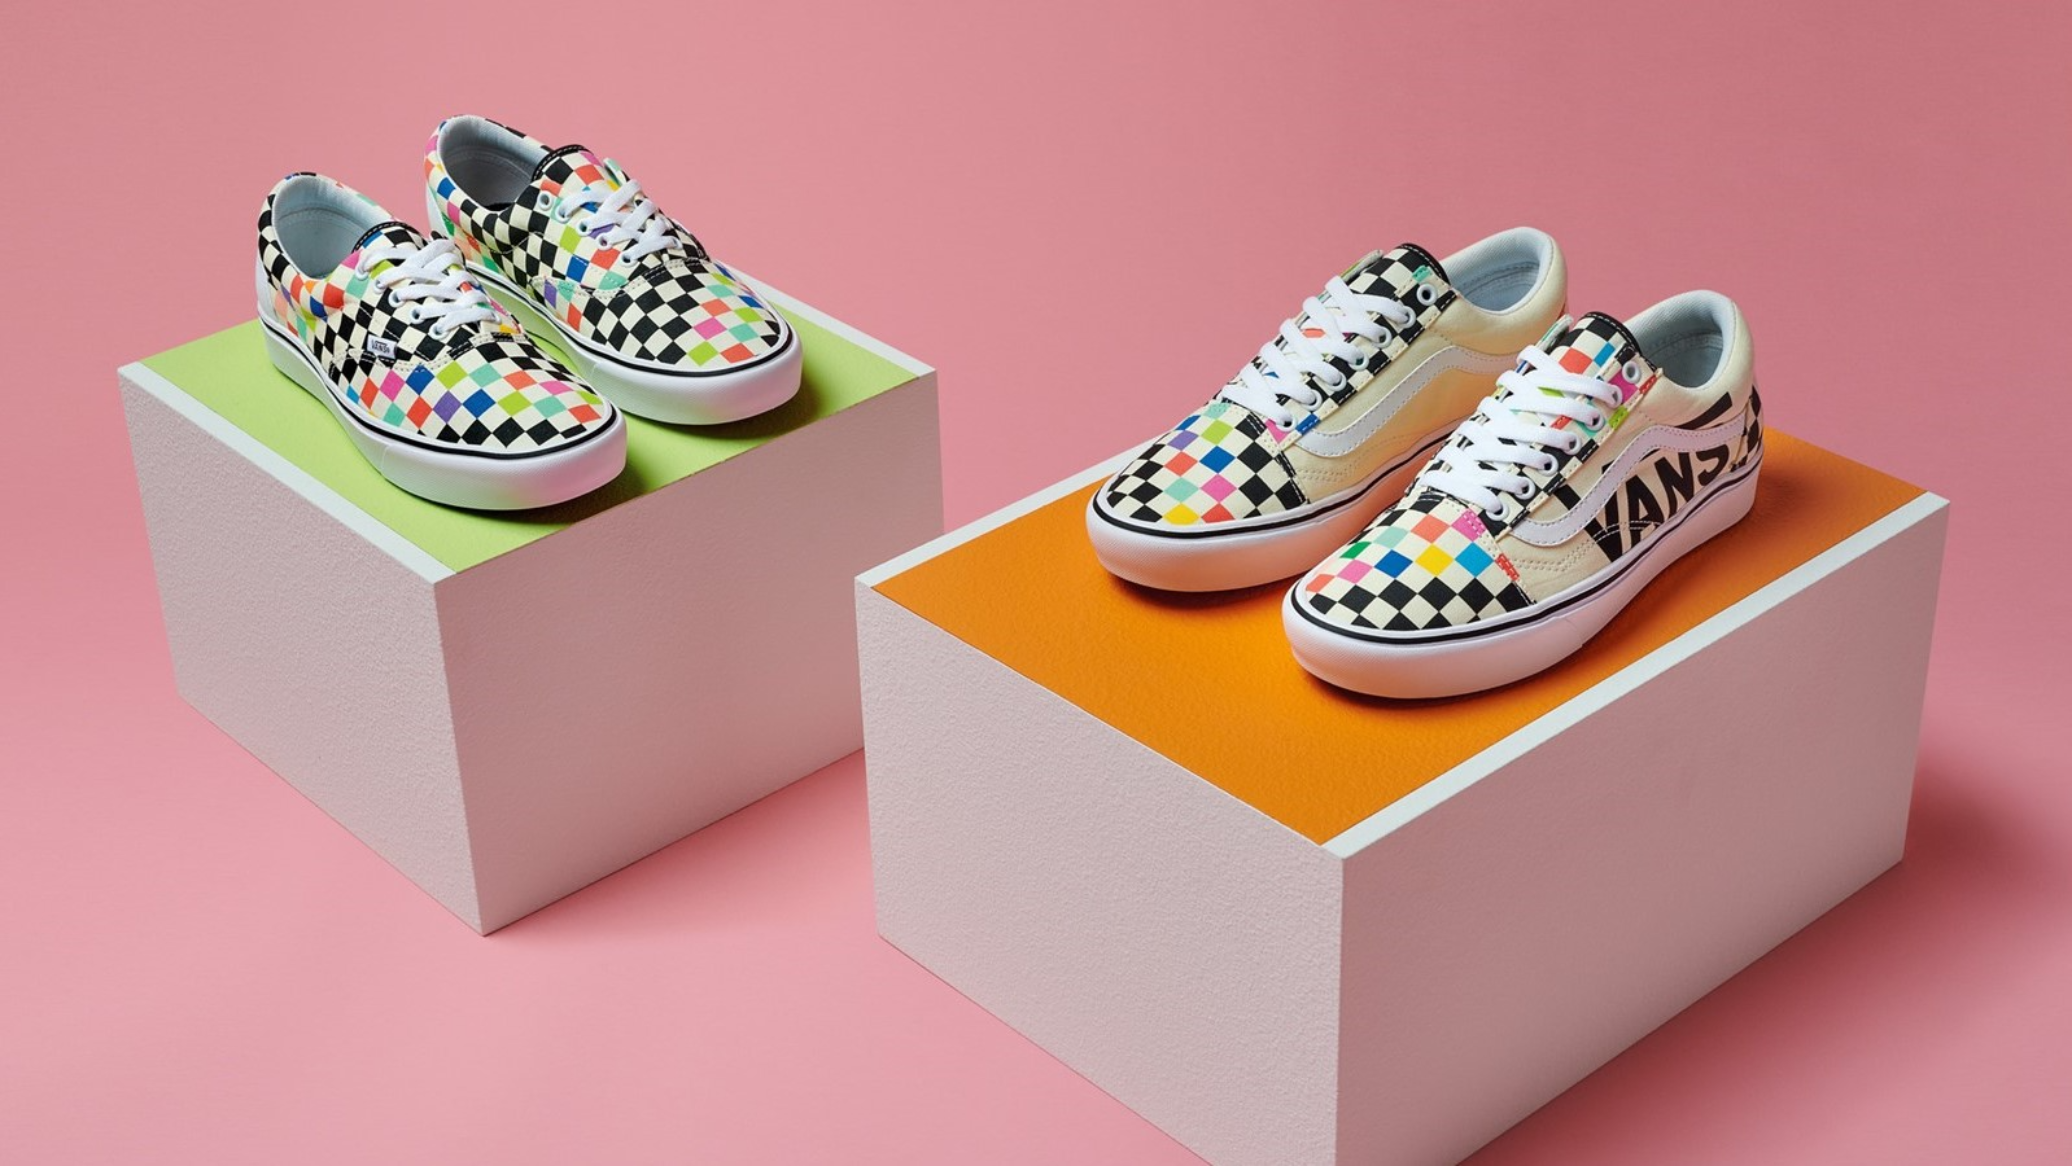 Cirkus oversøisk modnes MoMA Design Store】MOMA AND VANS COLLABORATE TO LAUNCH SPECIAL EDITION |  TOPICS | GYRE